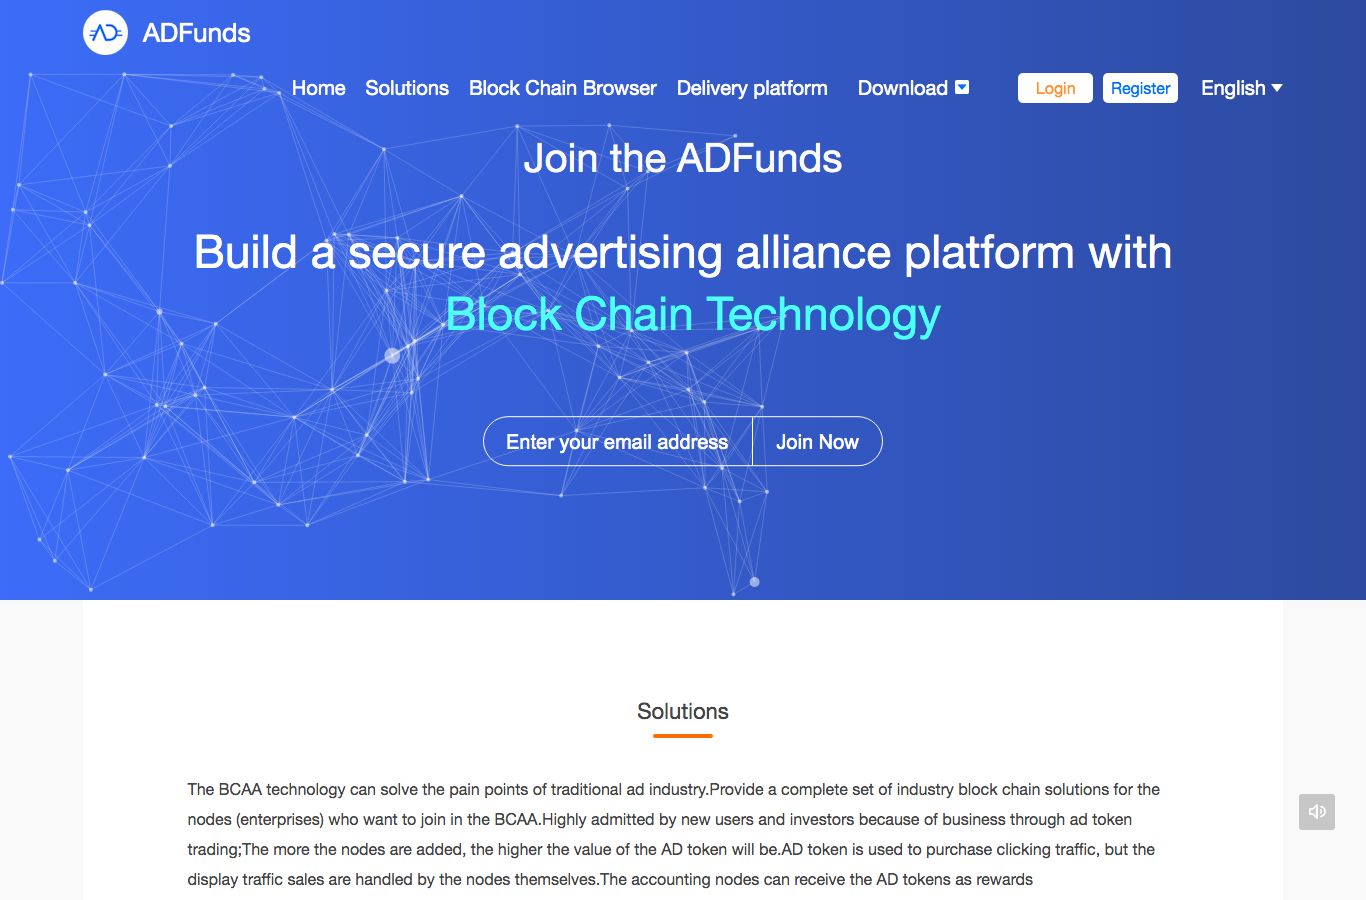 ADFunds